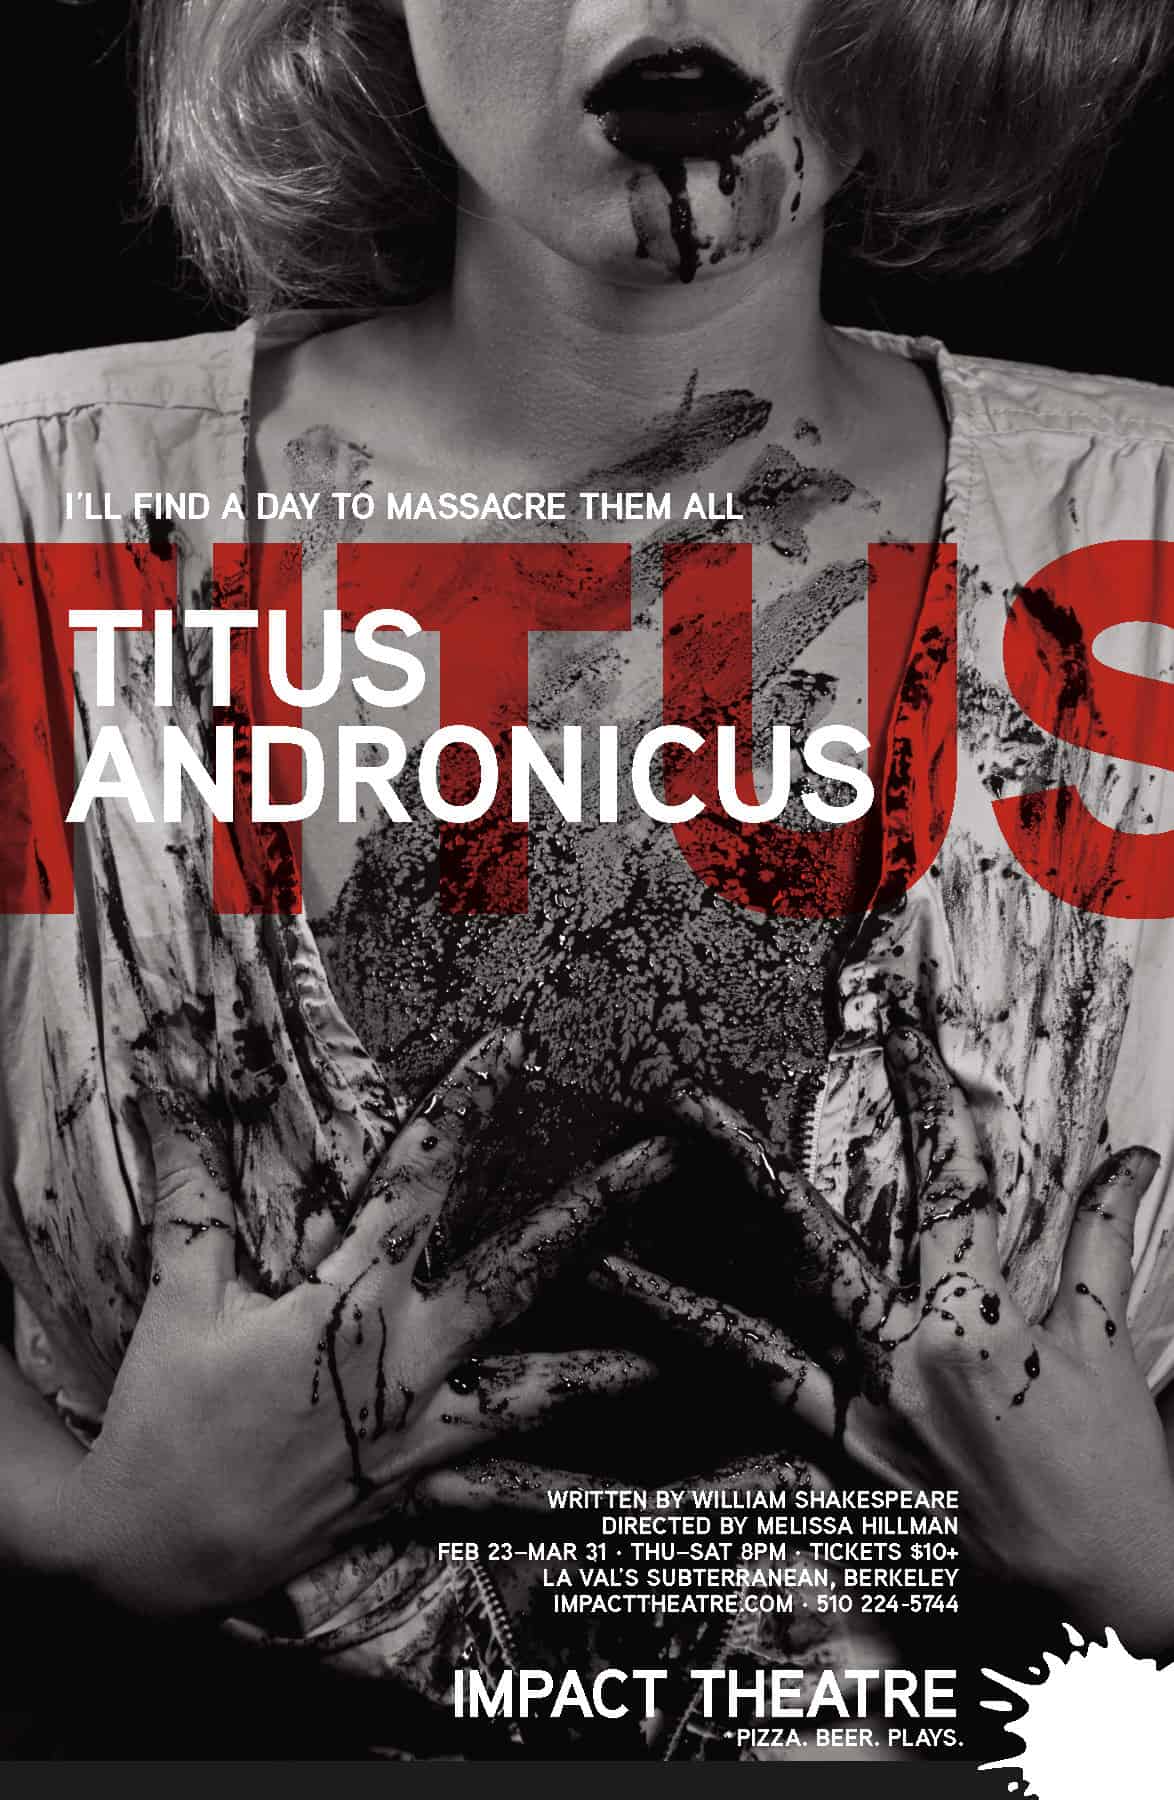 Poster for the play "Titus Andronicus" at Impact Theatre. It's a black and white image of a woman seen from the mouth to chest, drenched in blood. Over the image is a translucent large TITUS in red.